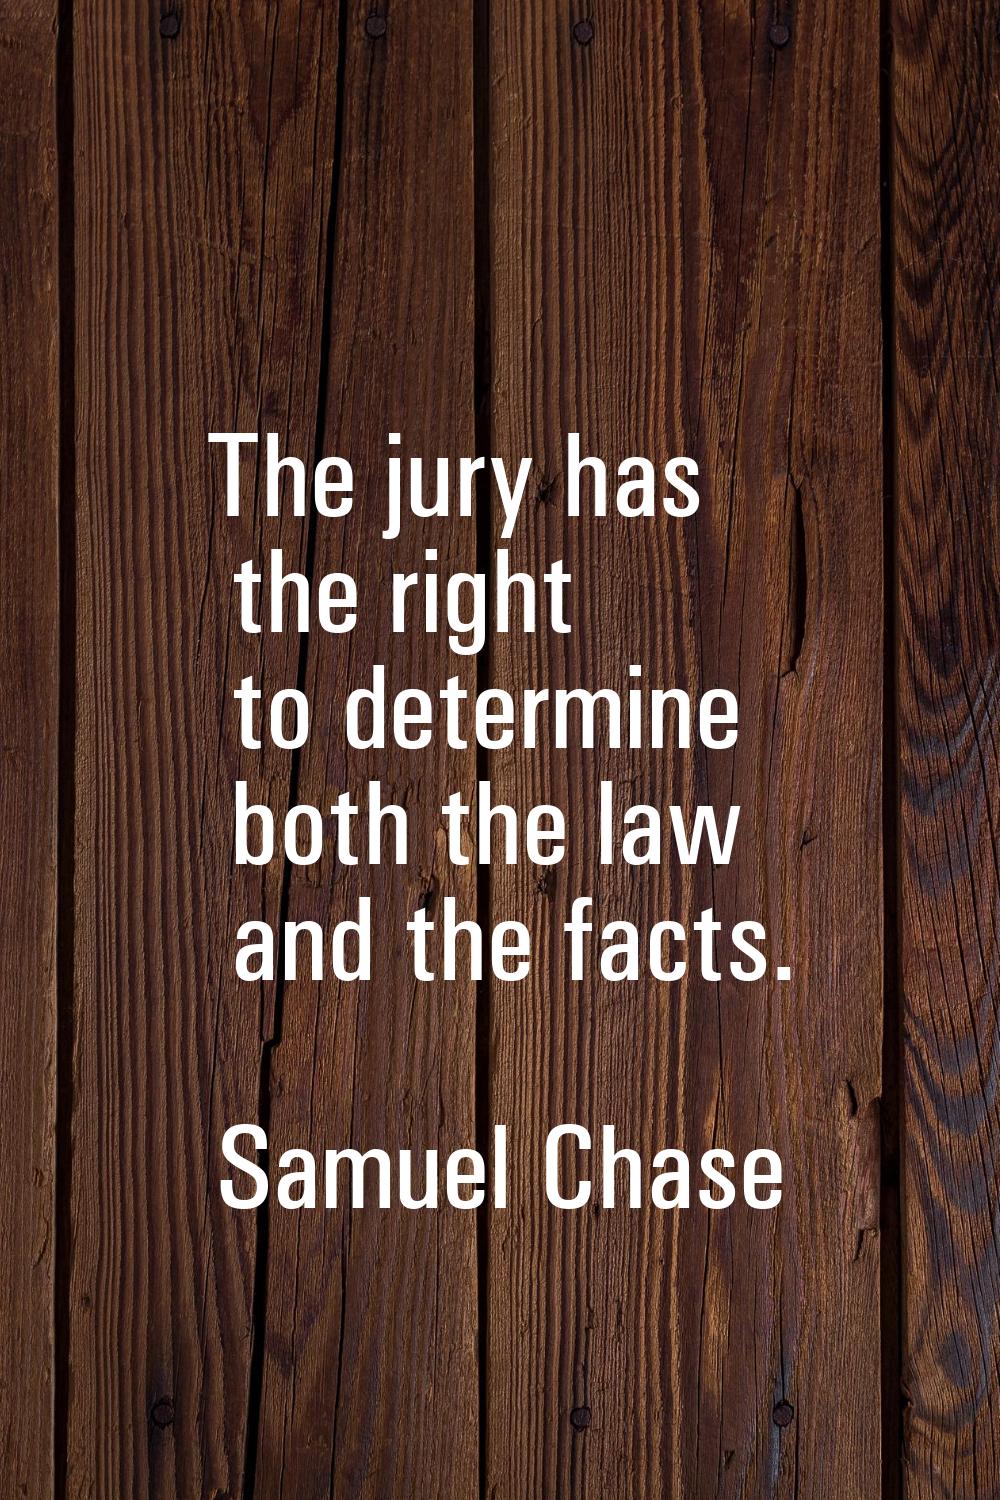 The jury has the right to determine both the law and the facts.